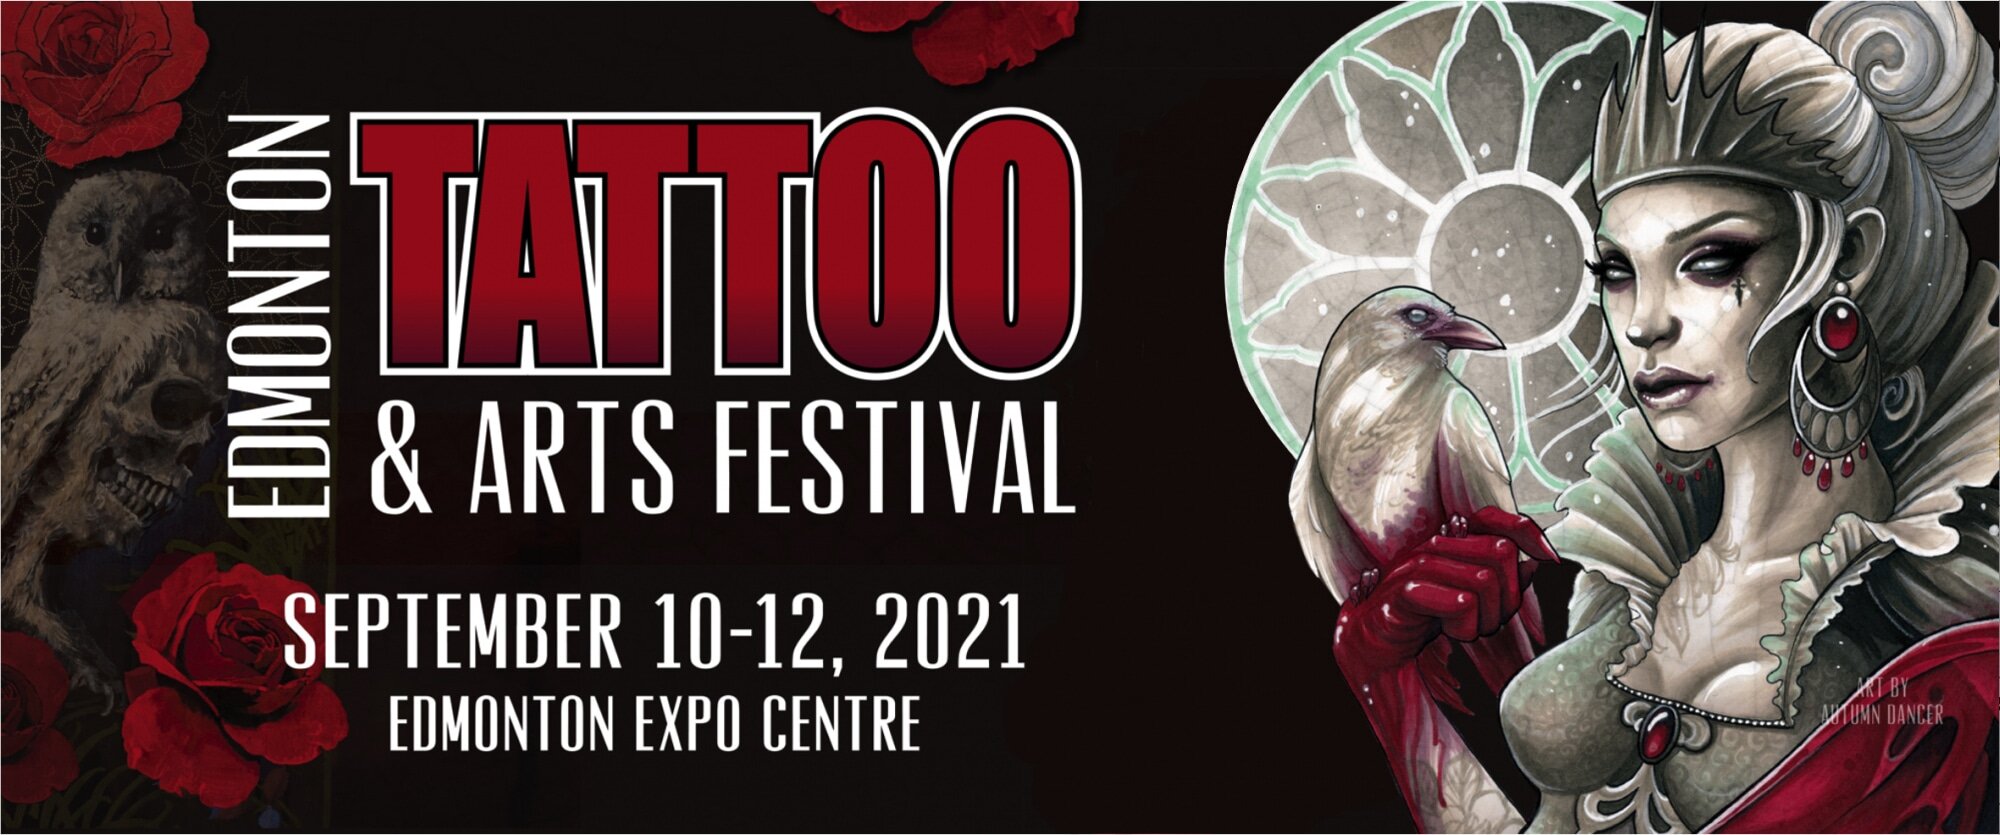 jacobramostattoos210 Will be  Ink Masters Tattoo Show  Facebook